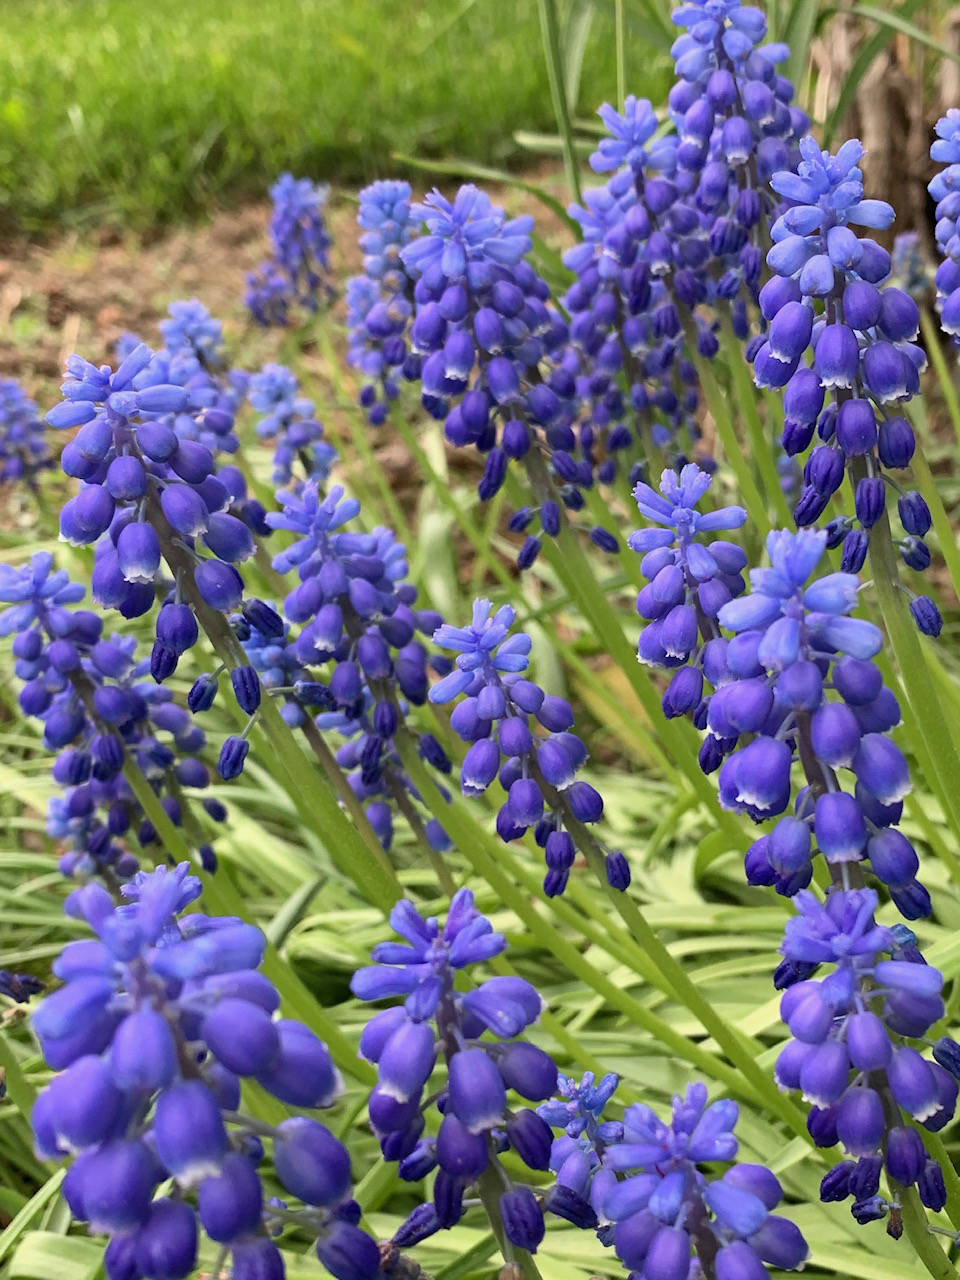 Muscari at its peak of perfection, as seen in the Kachemak Gardener’s garden on May 27, 2019, in Homer, Alasa. (Photo by Rosemary Fitzpatrick)